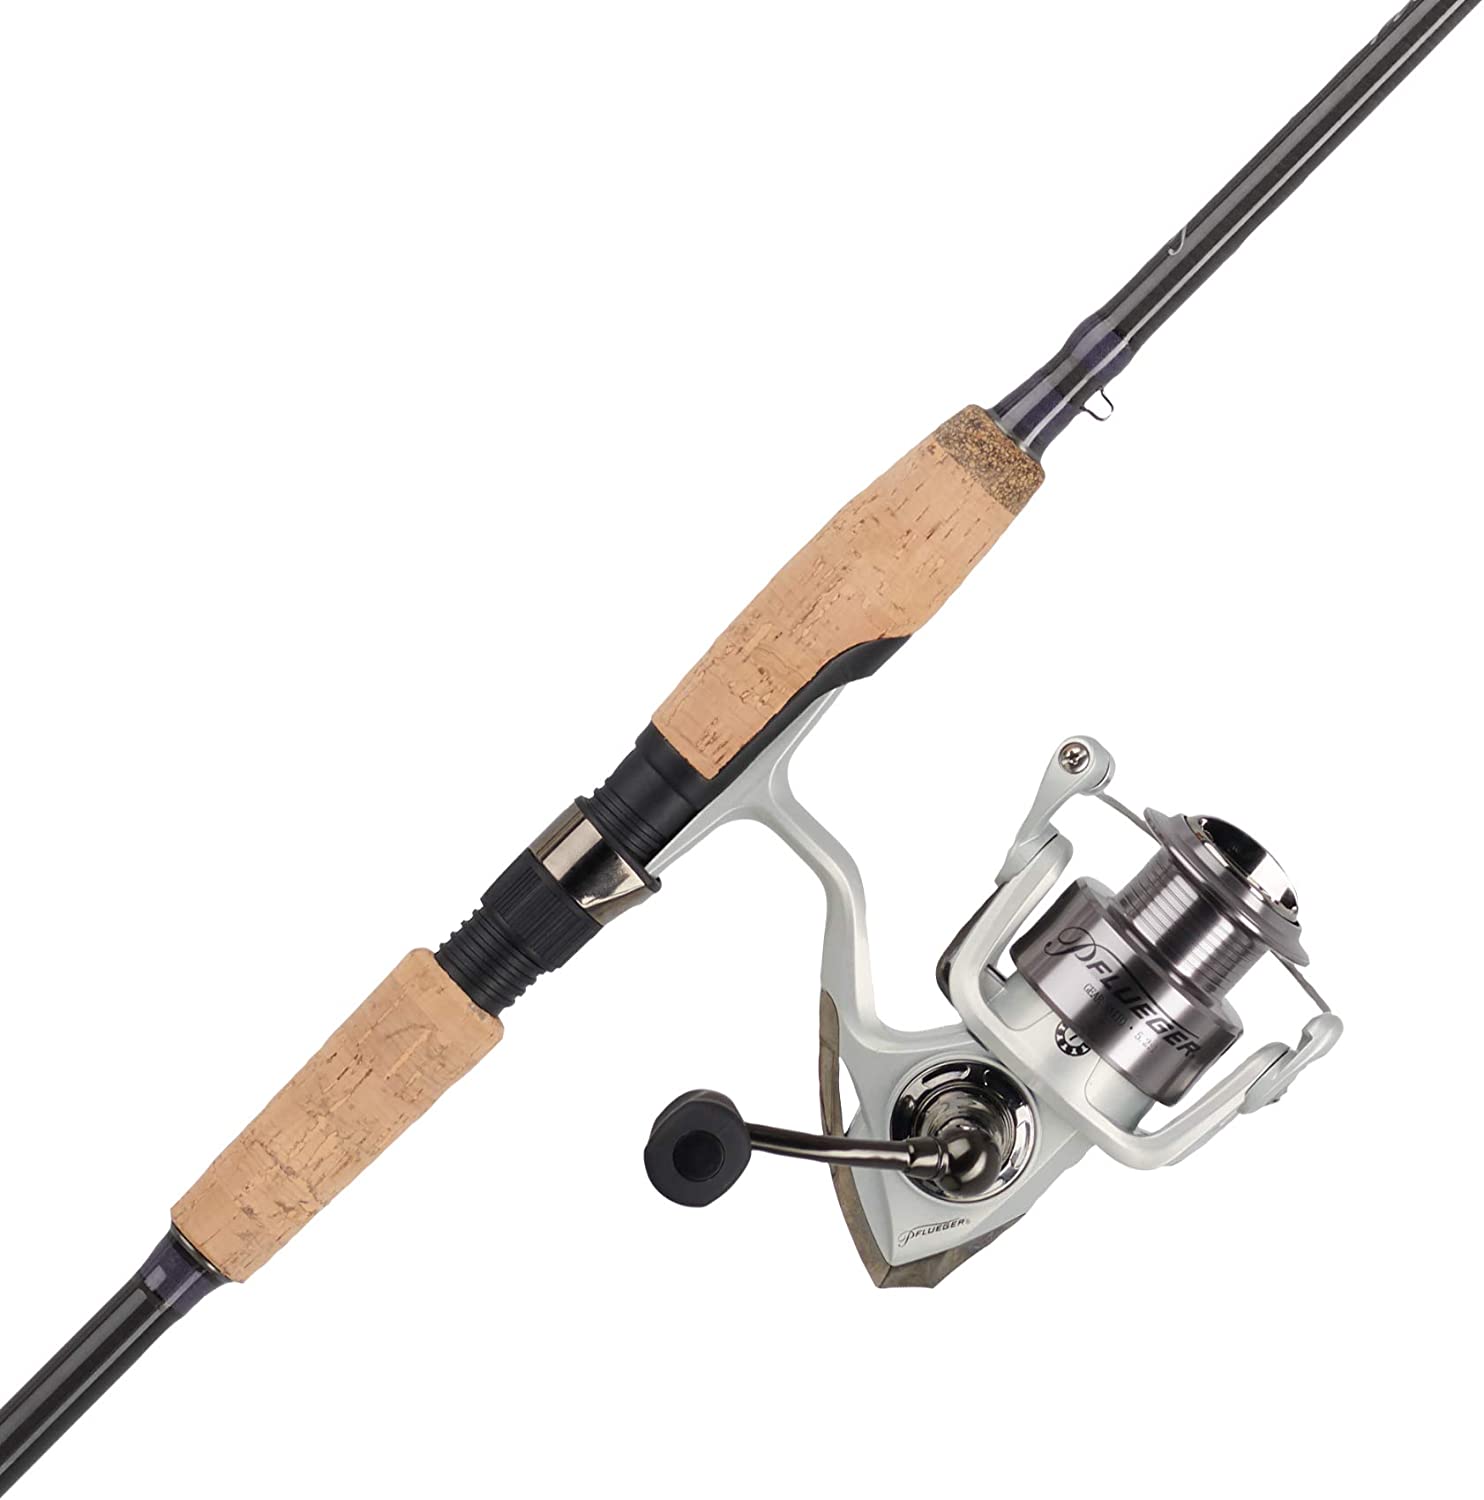 Pflueger Trion Spinning Combo New Model 30 Size Reel - 6'6" - M - 2pc with Fenwick Eagle Rod & Berkley Flicker Shad Baits - image 1 of 2